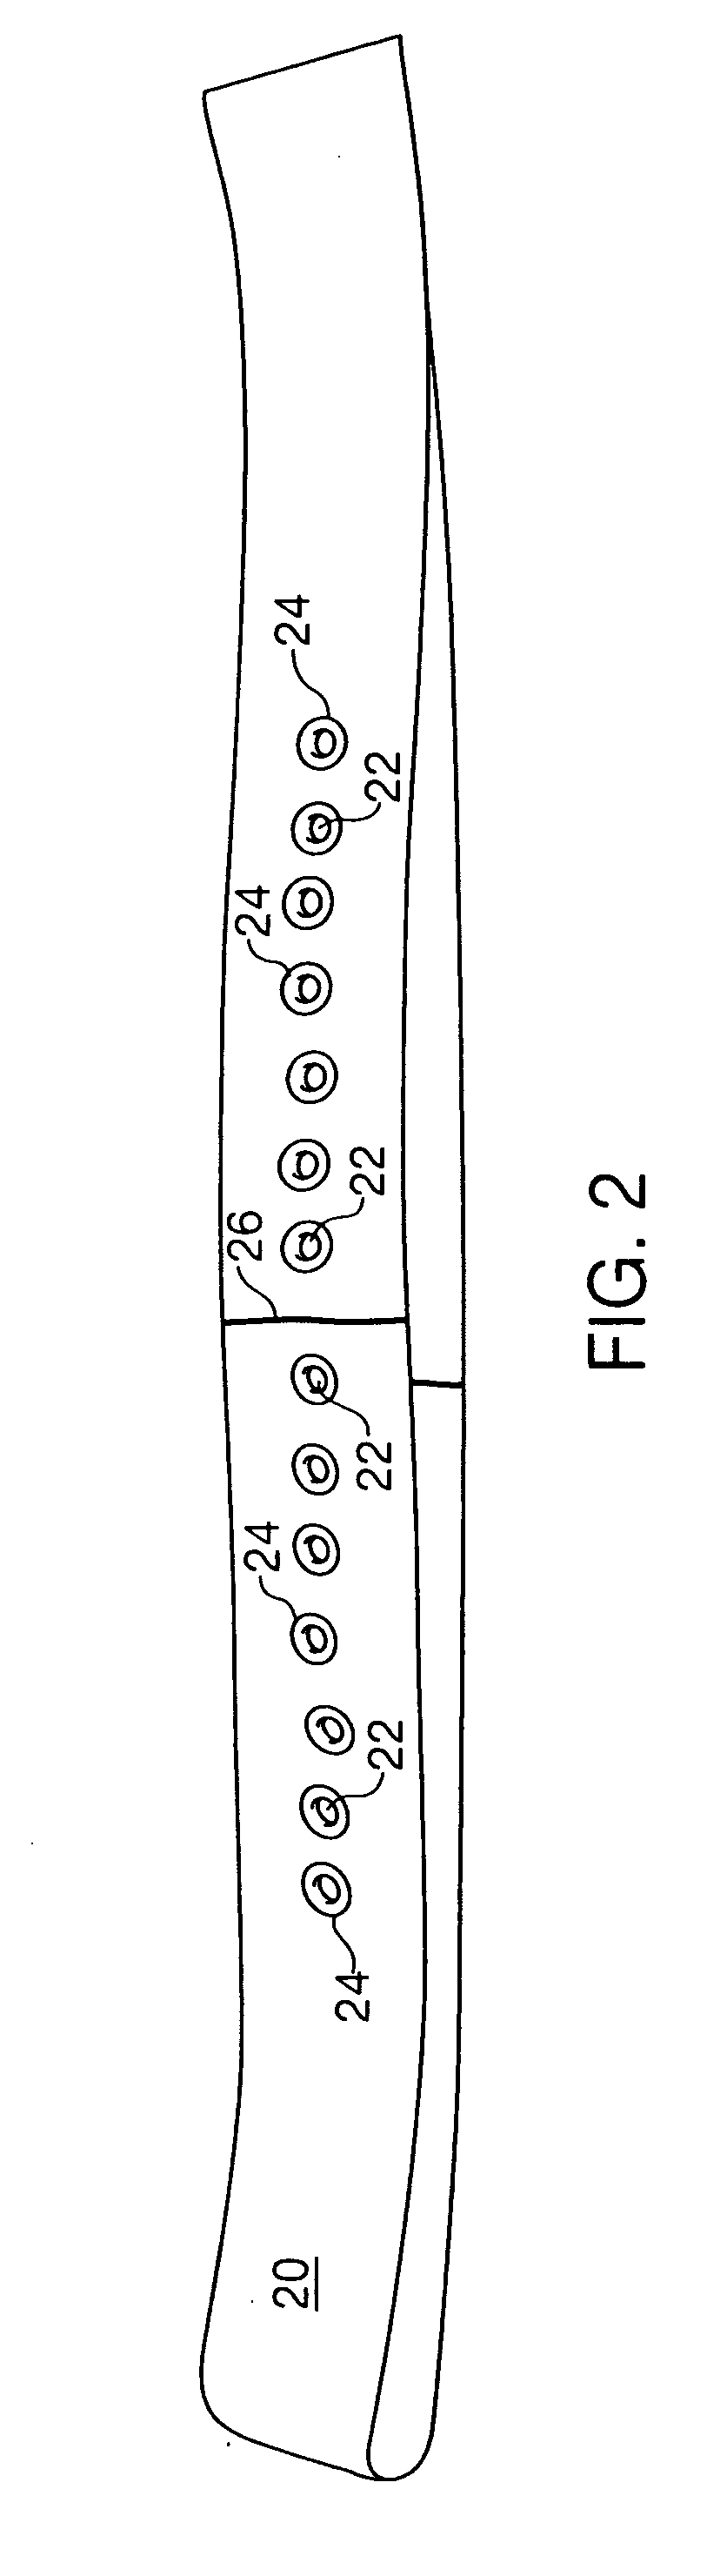 Apparatus for use in injecting insulin from a filled syringe